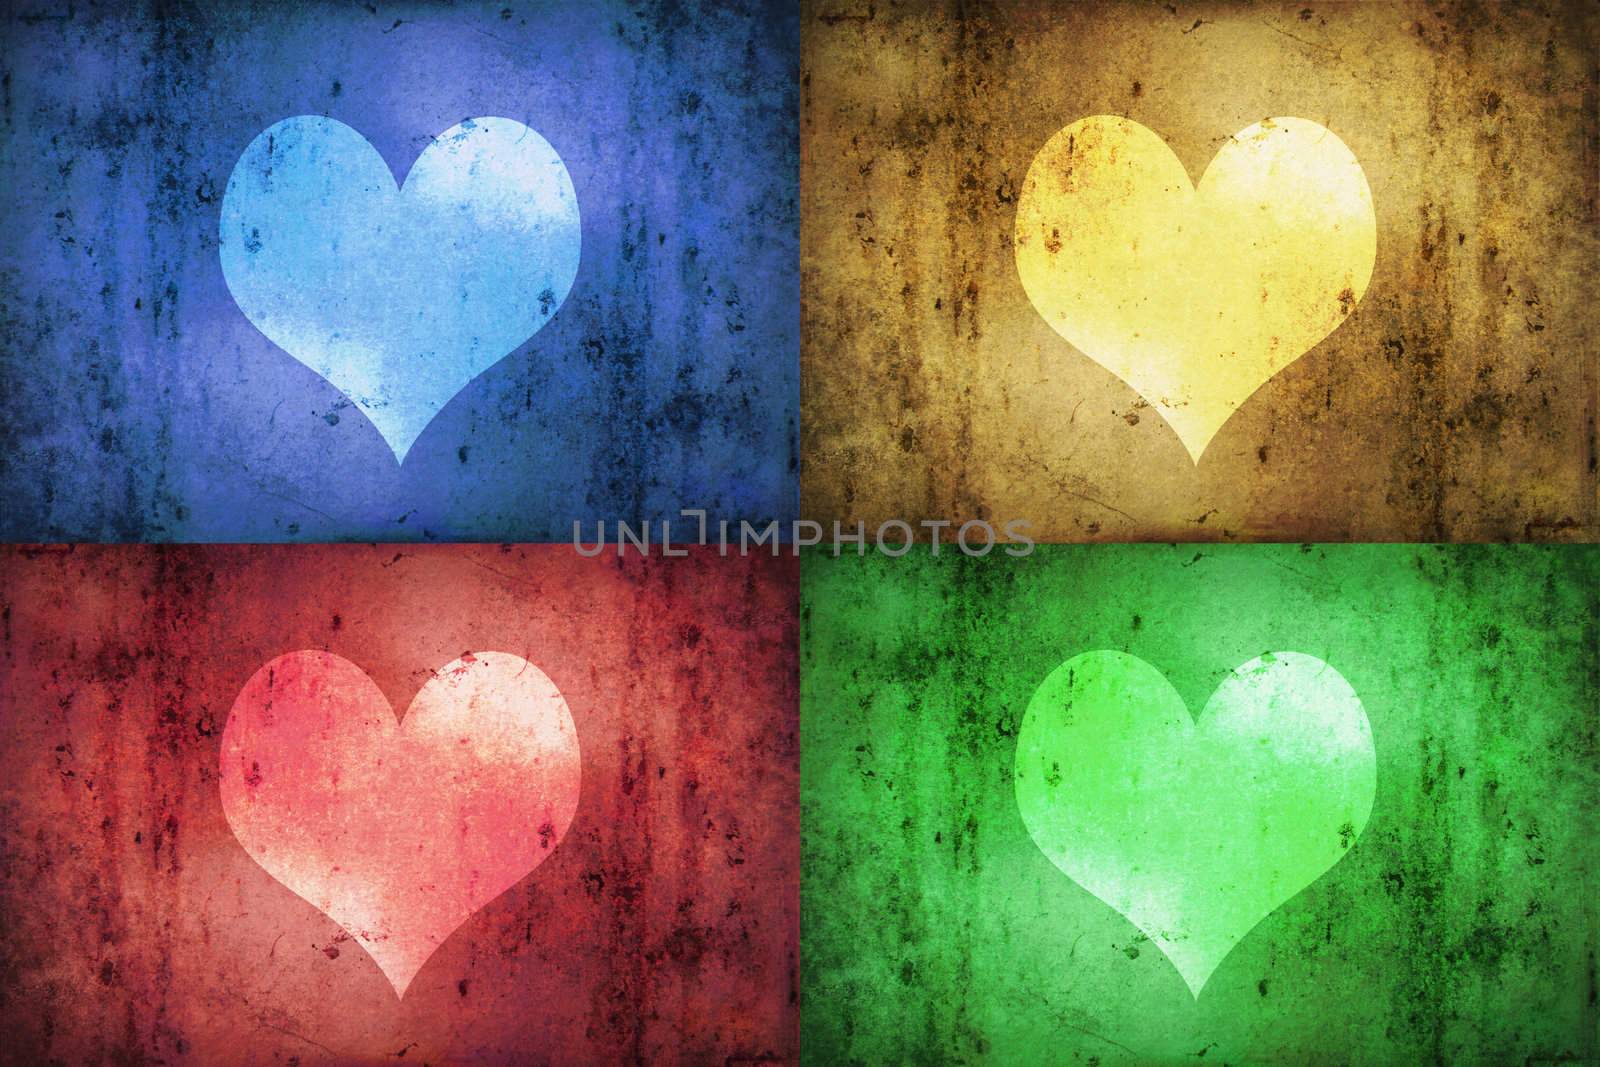 Coloured hearts design: a blue, yellow, red and green heart on a grungy background.